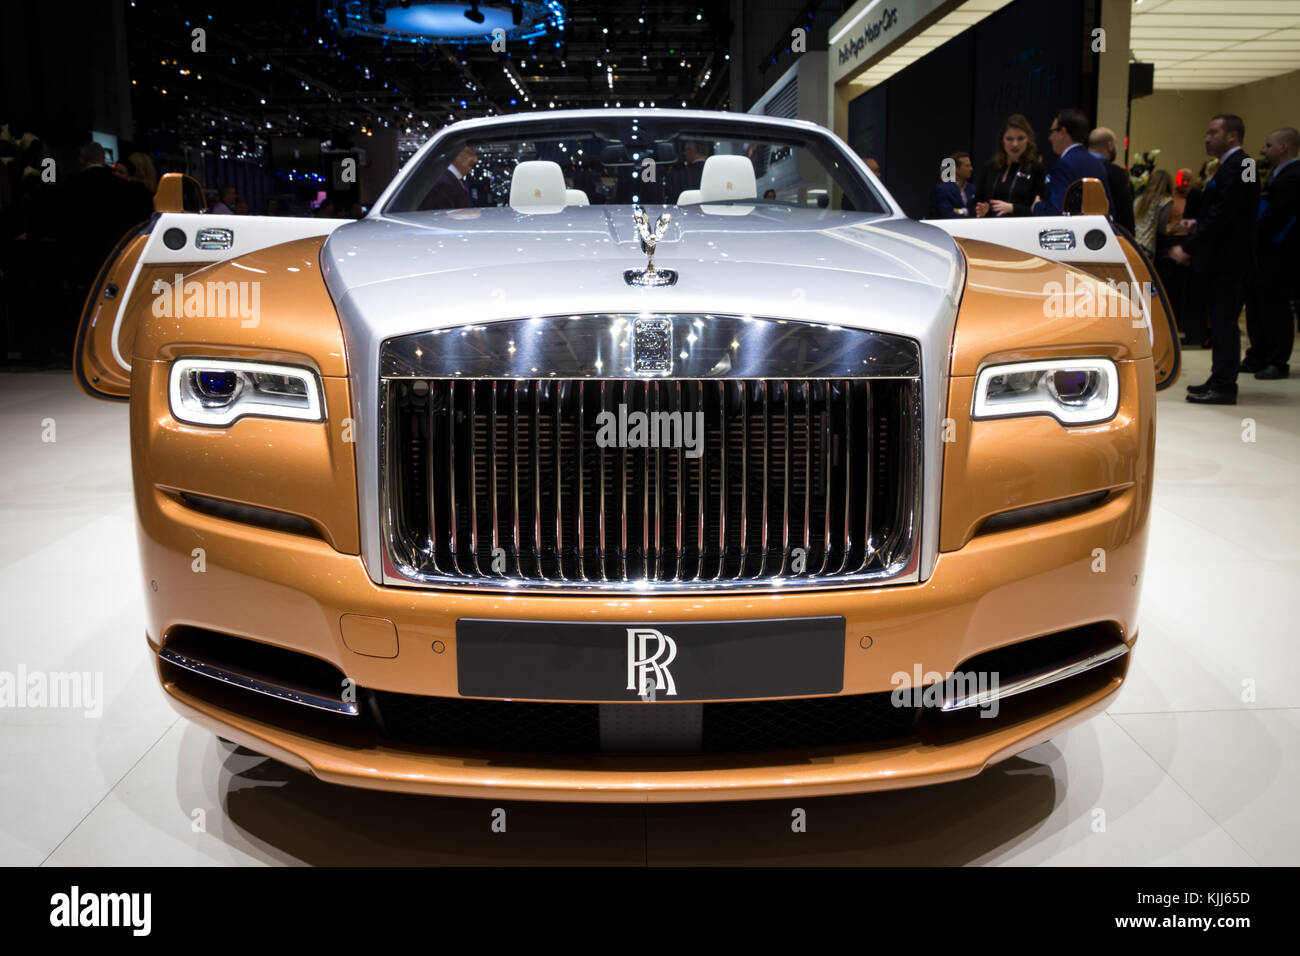 Brown Rolls Royce High Resolution Stock Photography and Images - Alamy